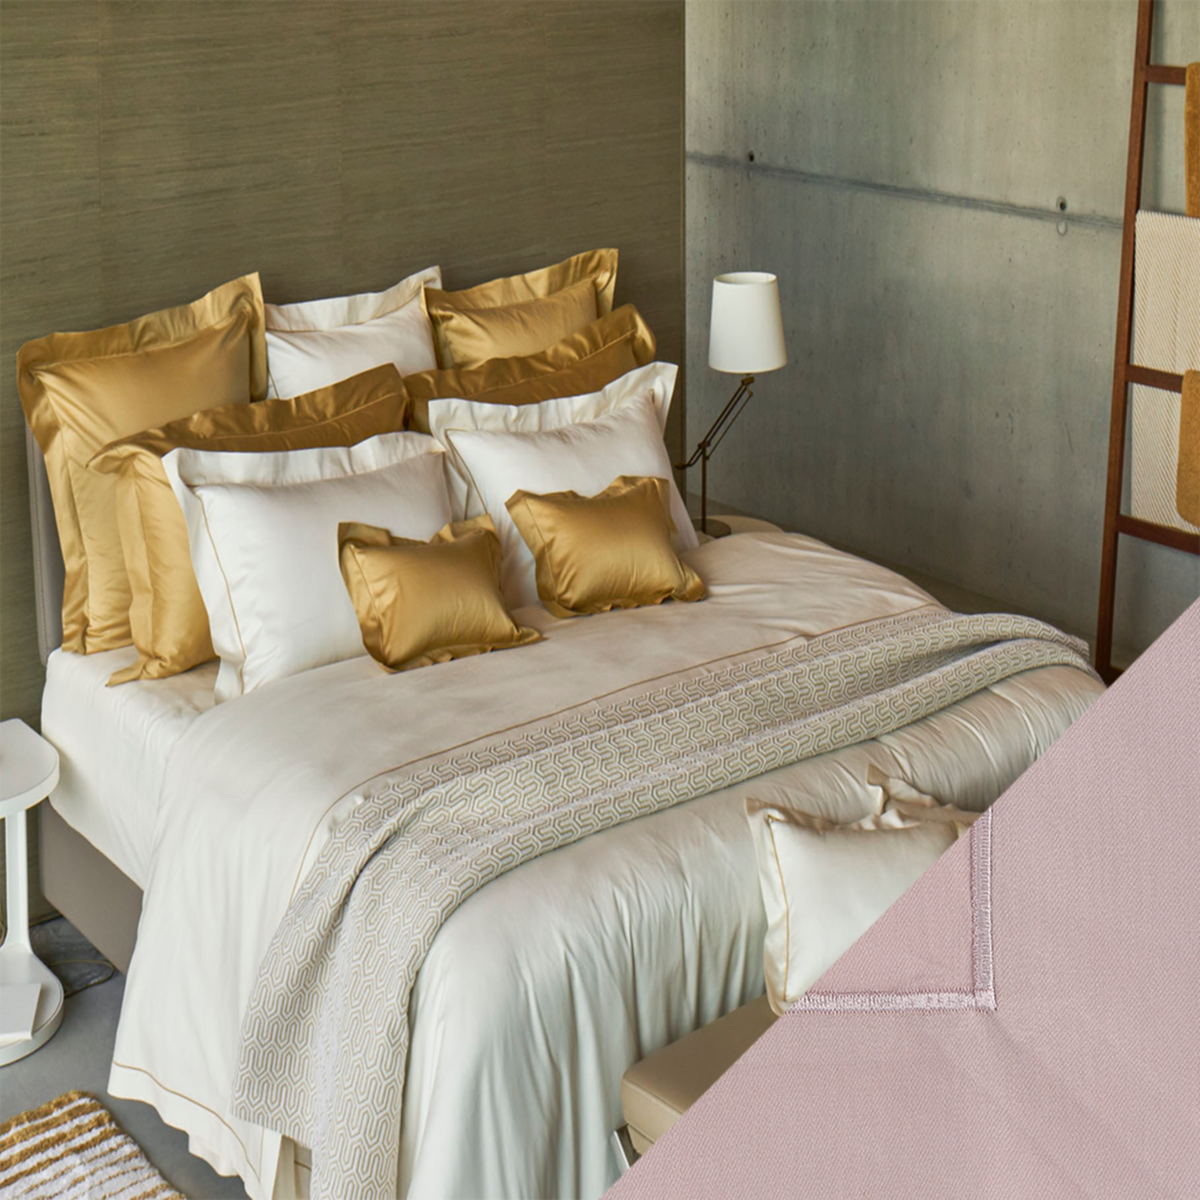 Celso de Lemos Bourdon Bedding Collection with Nuage Rose Swatch